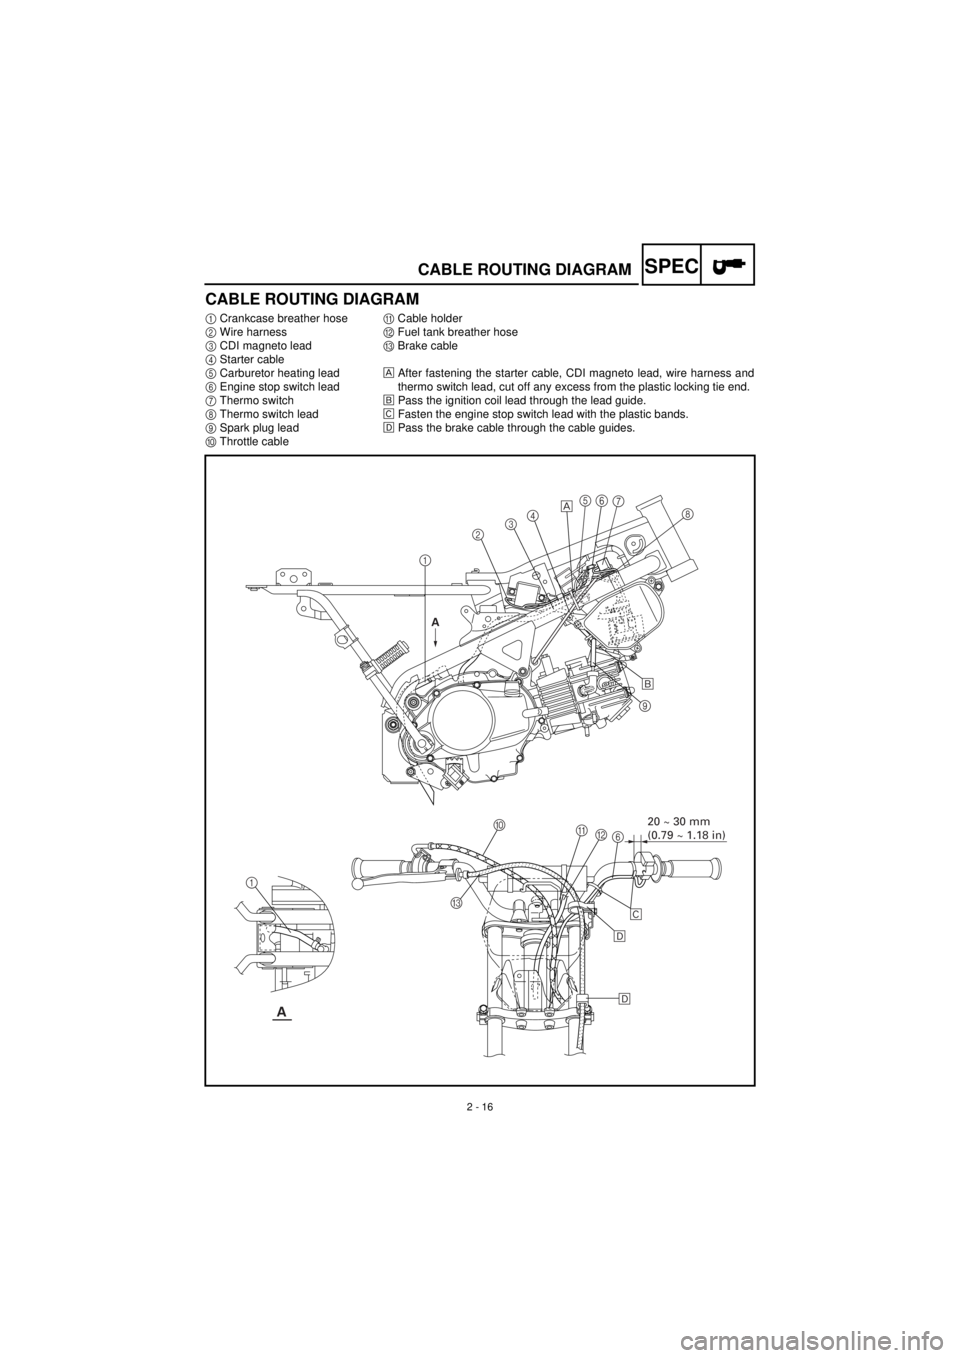 YAMAHA TTR90 2001  Betriebsanleitungen (in German)  
2 - 16
SPEC
 
CABLE ROUTING DIAGRAM
CABLE ROUTING DIAGRAM 
1  
Crankcase breather hose  
2  
Wire harness  
3  
CDI magneto lead  
4  
Starter cable  
5  
Carburetor heating lead  
6  
Engine stop s